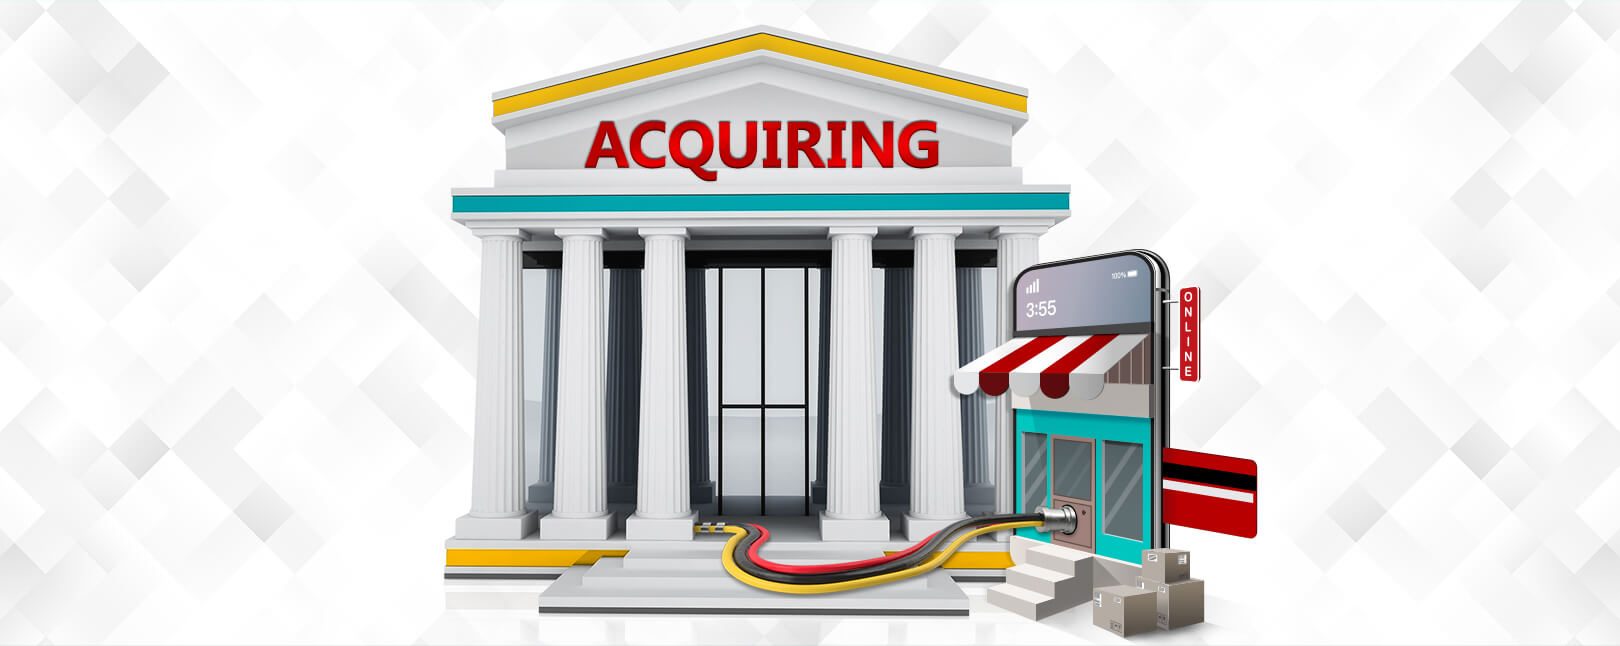 The Acquiring Bank